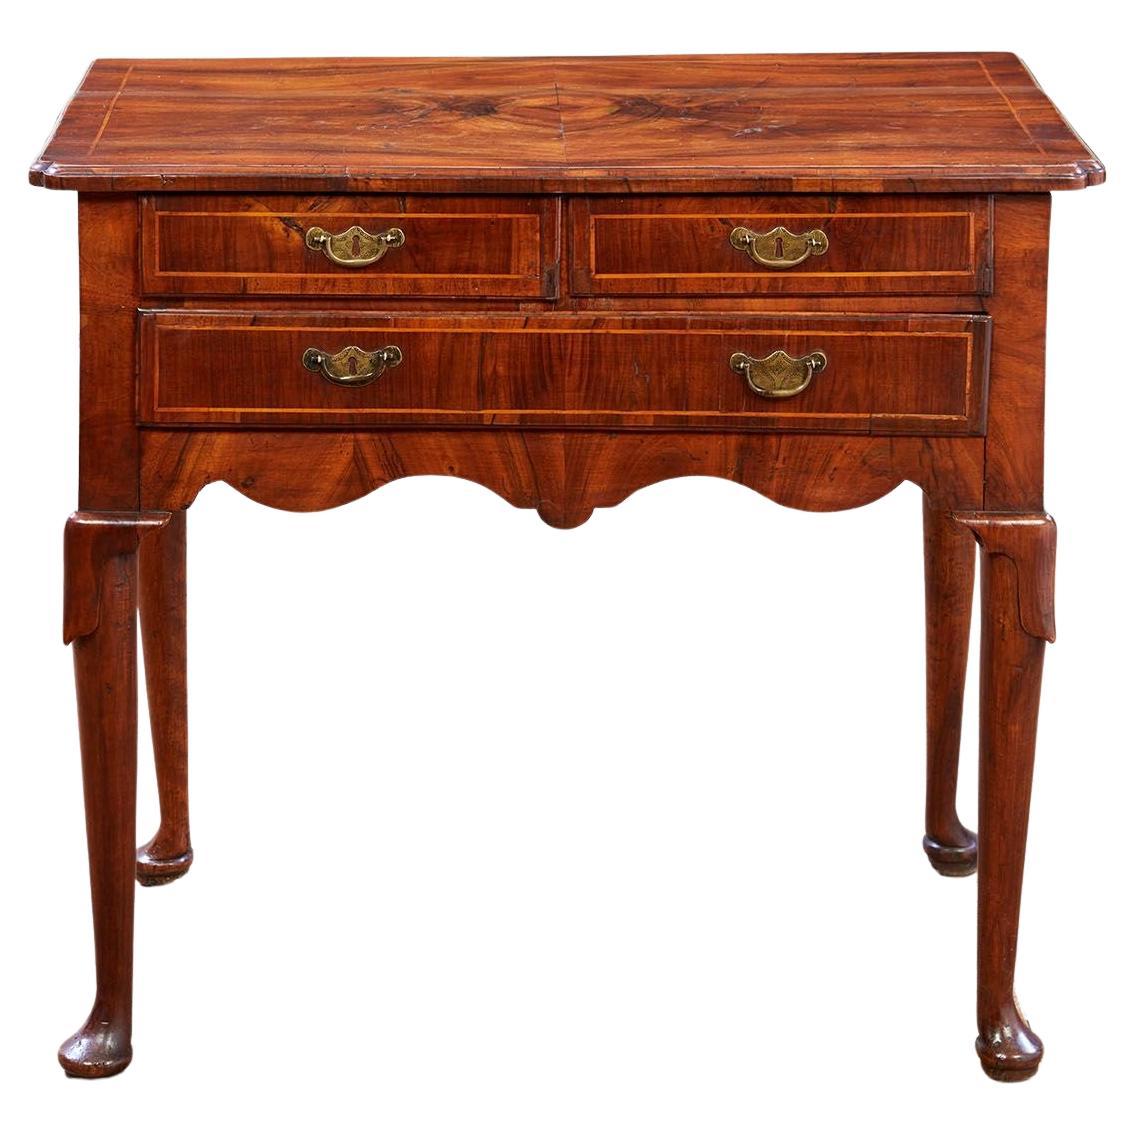 Exquisite Early English Lowboy